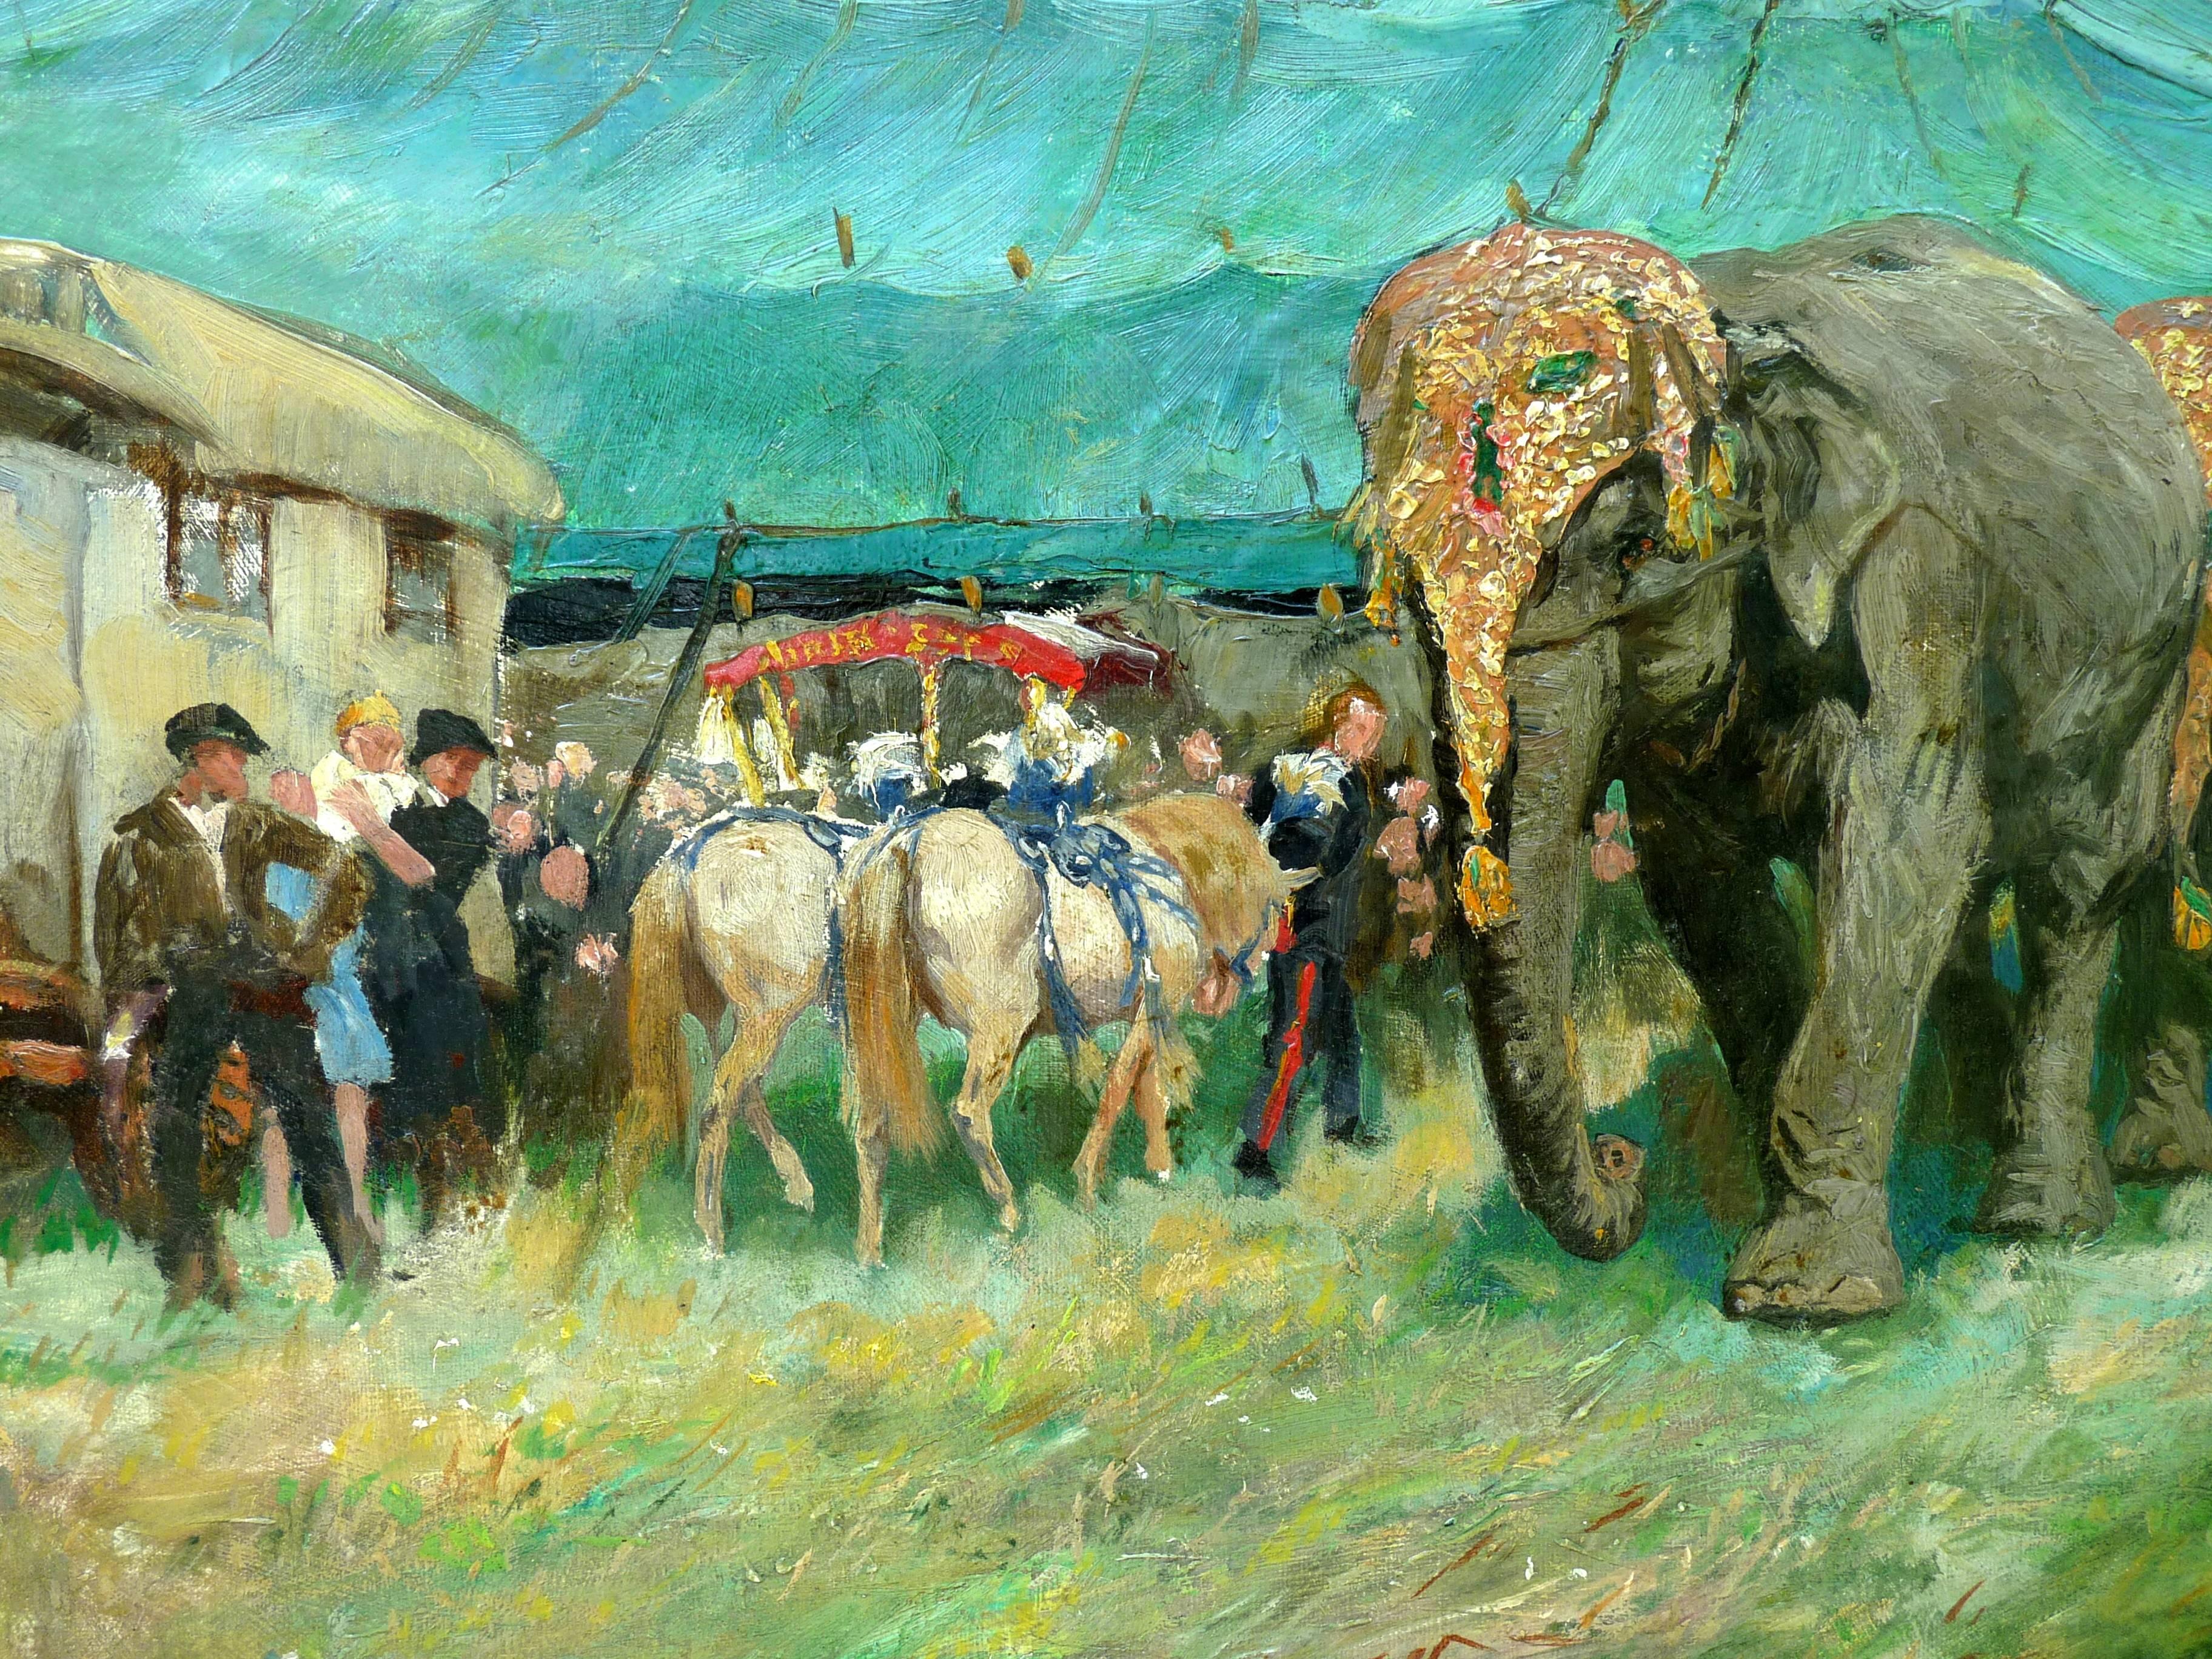 Charming oil painting showing the excitement of children as they observe the
gaiety of the circus and especially the elephants.

The elephants and the horses are dressed for their performance and the circus tent stands behind them.

Ms. Welch